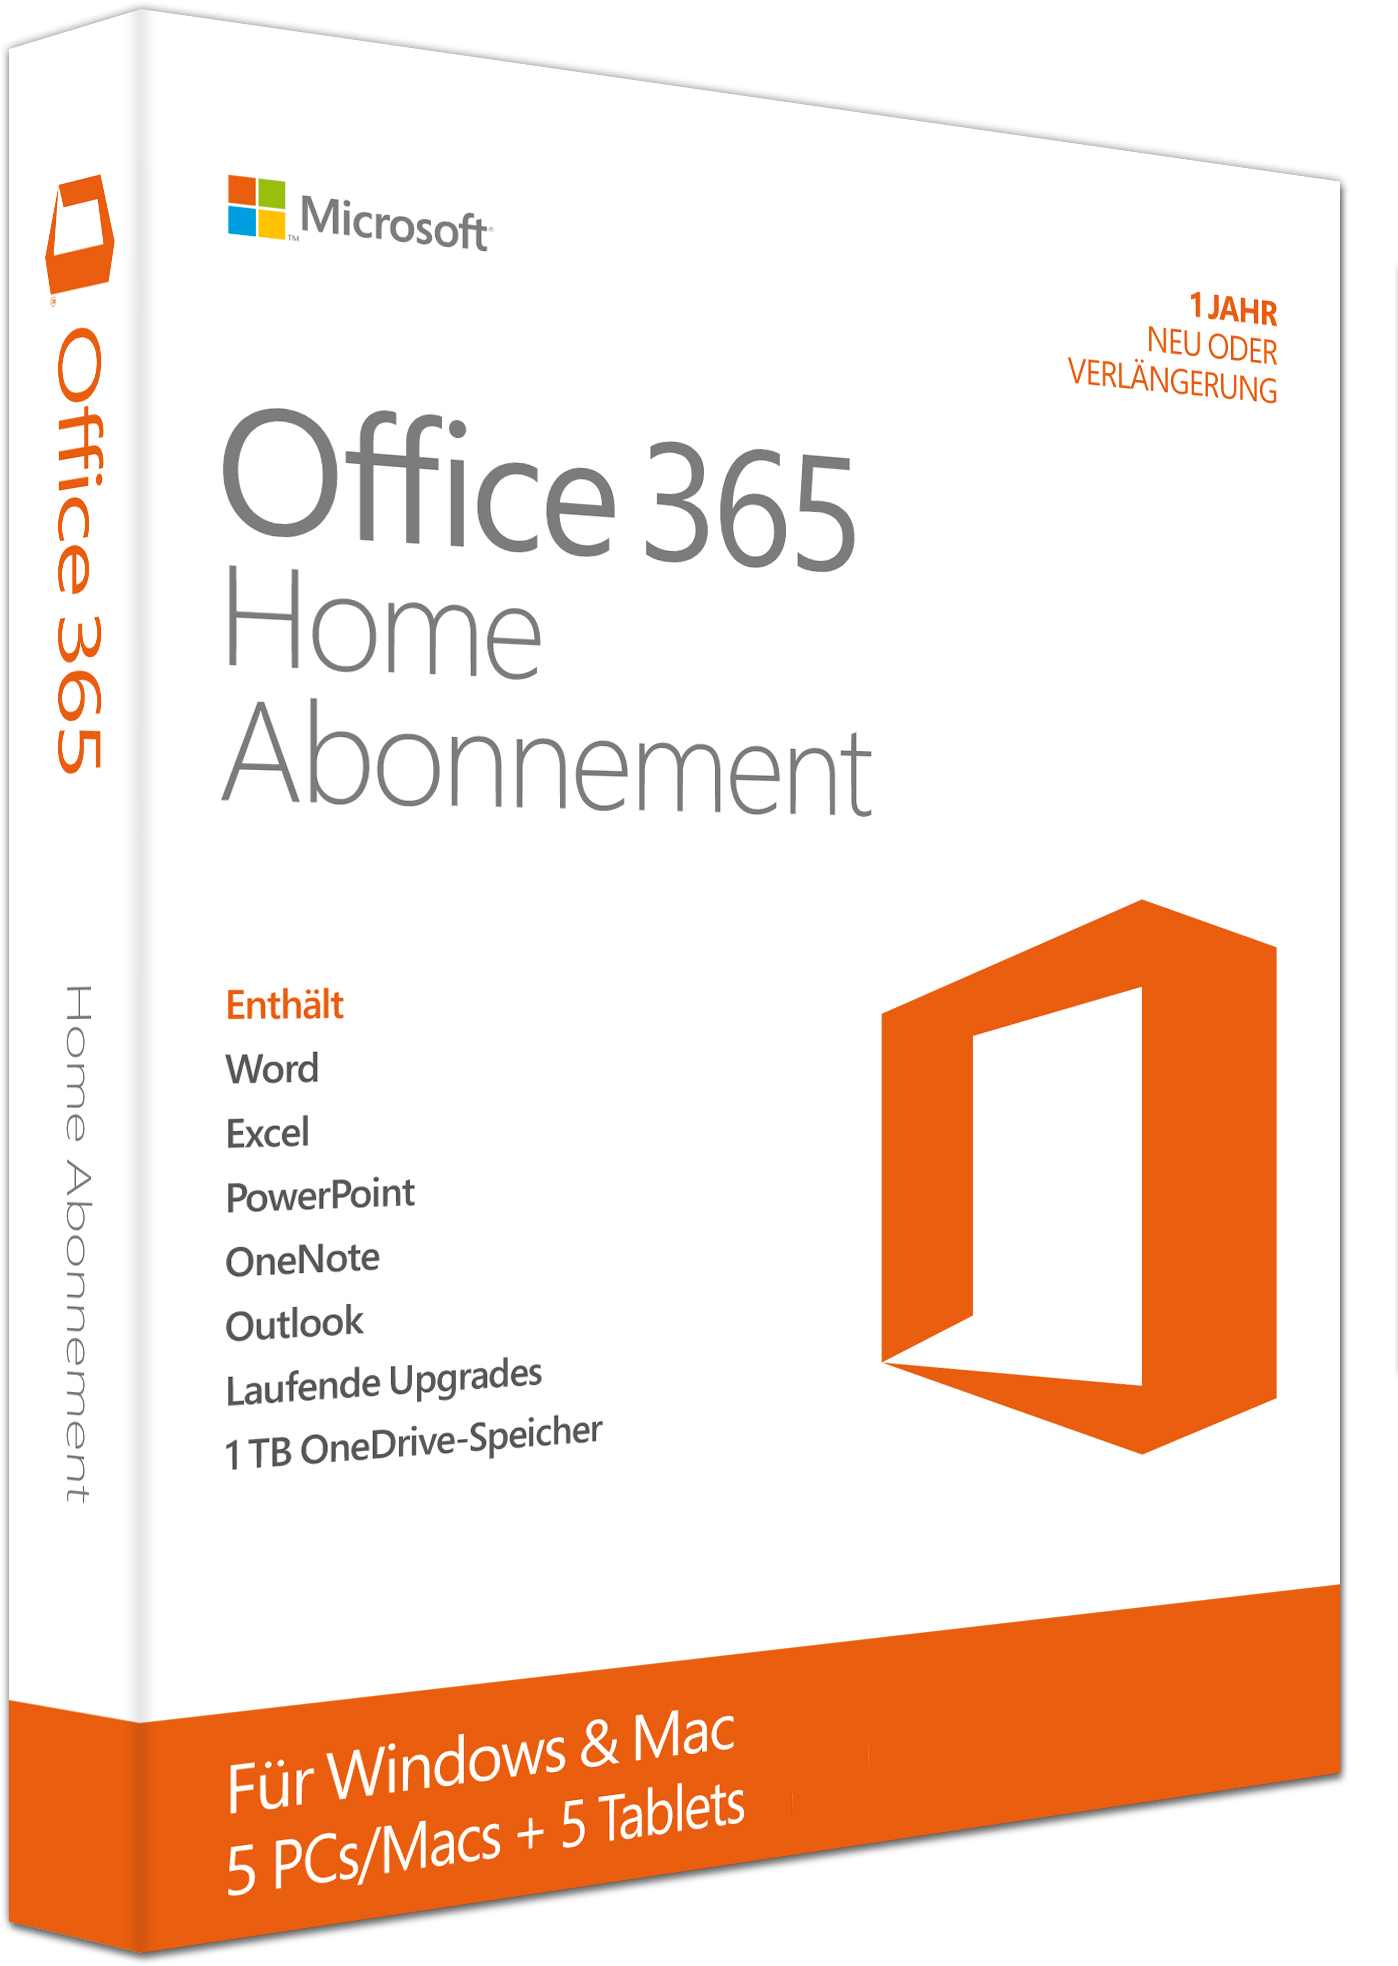 microsoft office 365 for mac free download full version crack